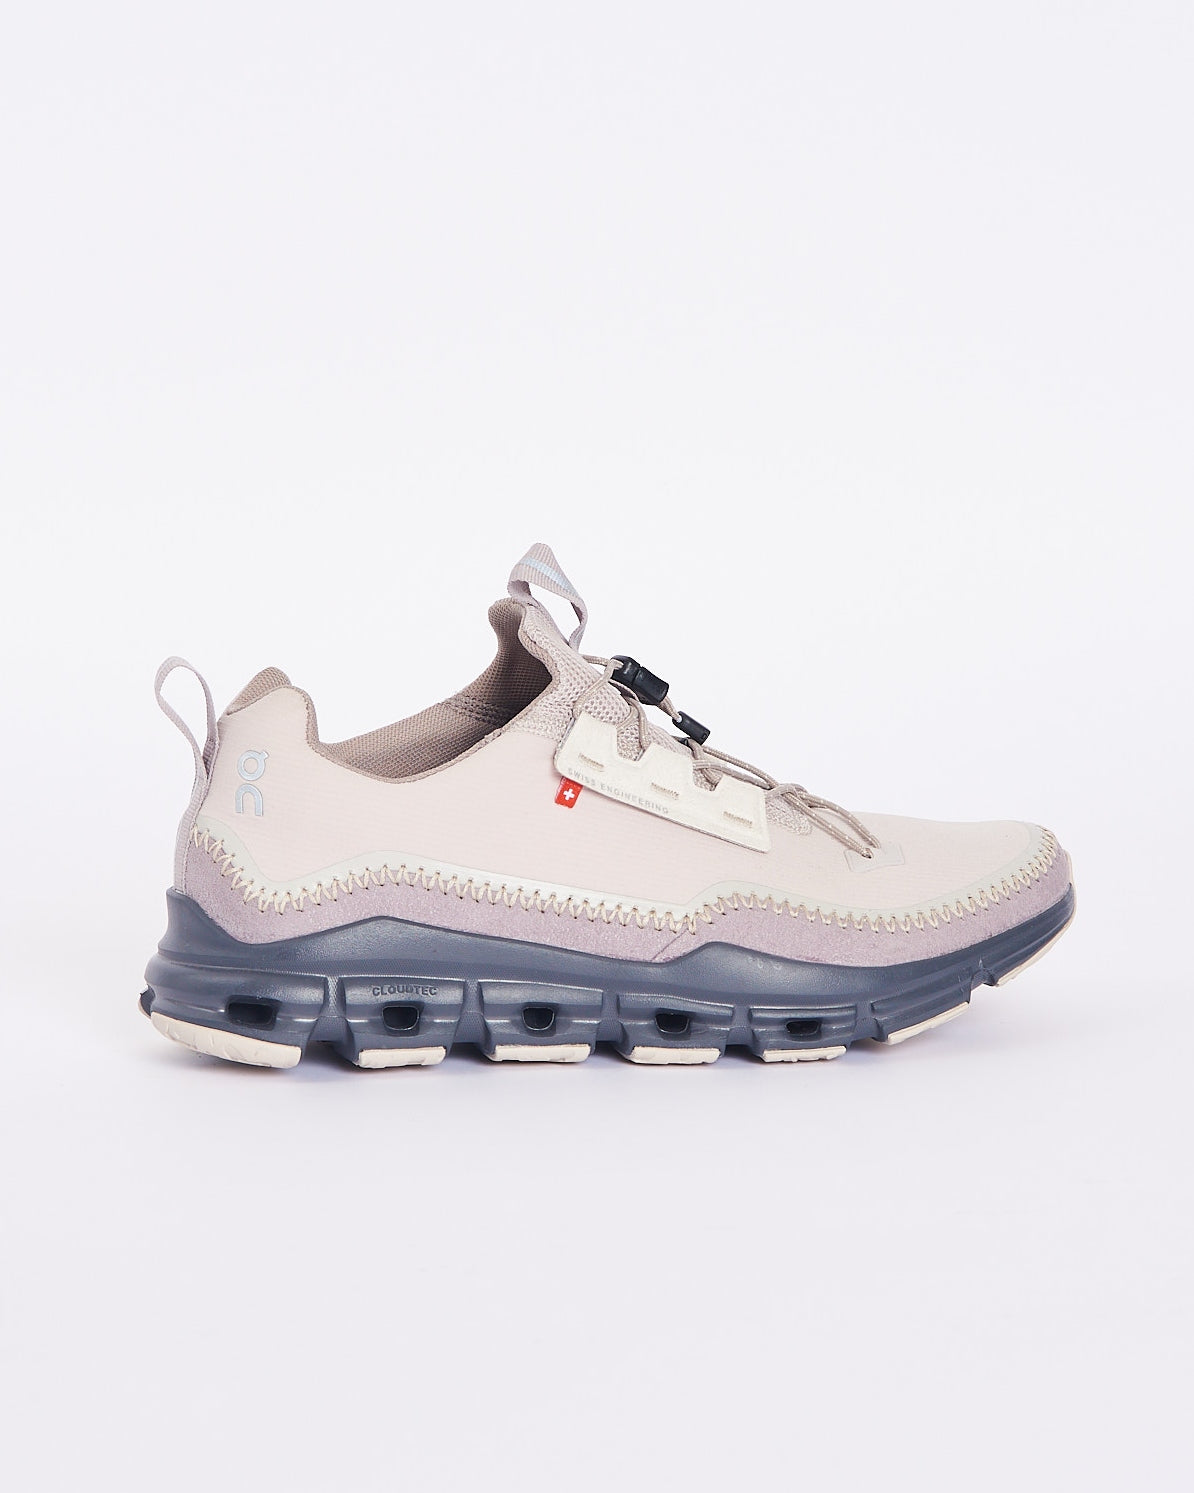 Find the Latest Cloud Away in Pearl Fog On Running for Sale at